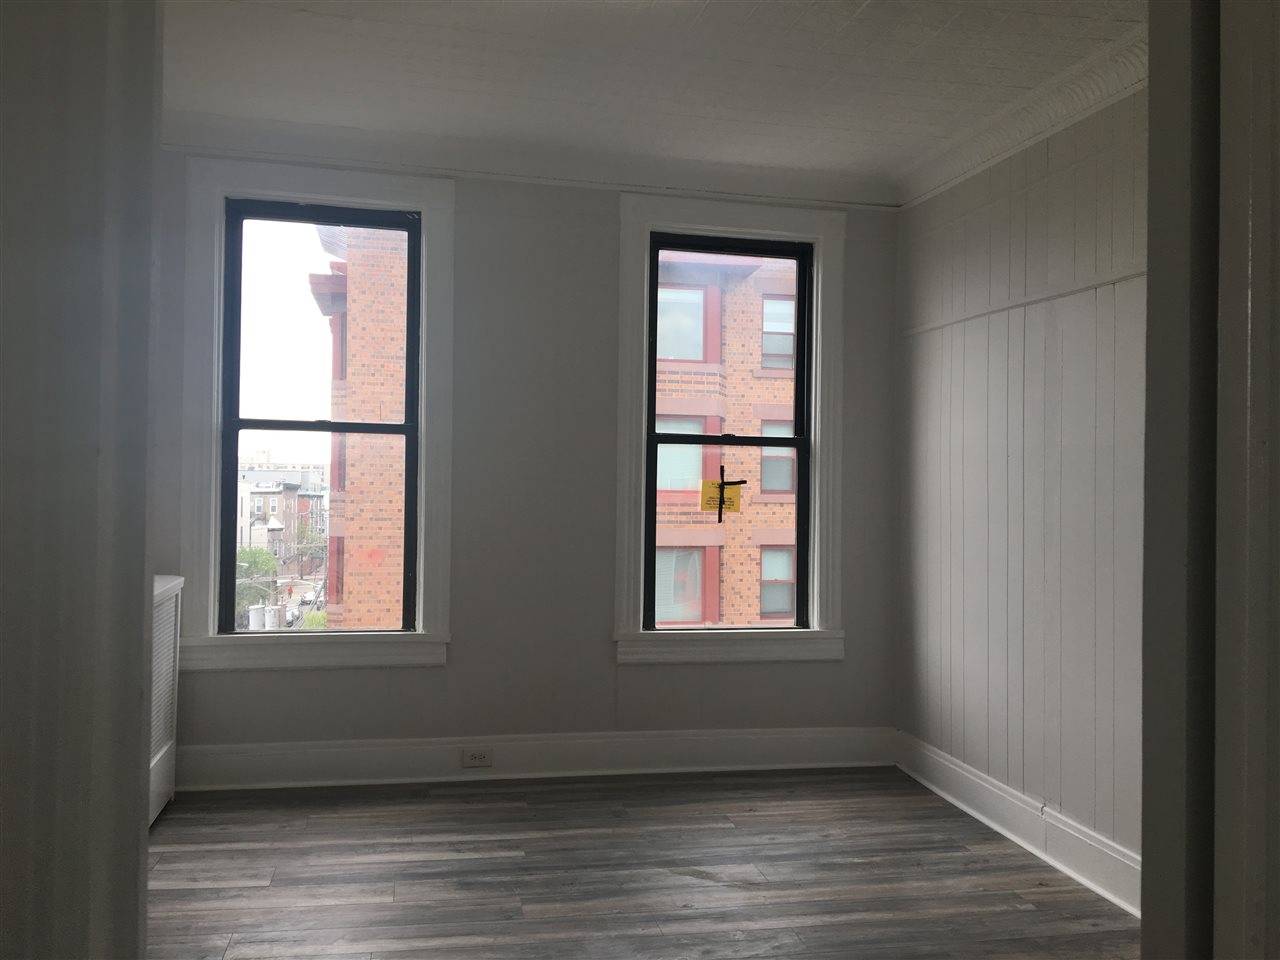 COMPLETELY RENOVATED 1 BEDROOM + DEN APARTMENT - 1 BR New Jersey